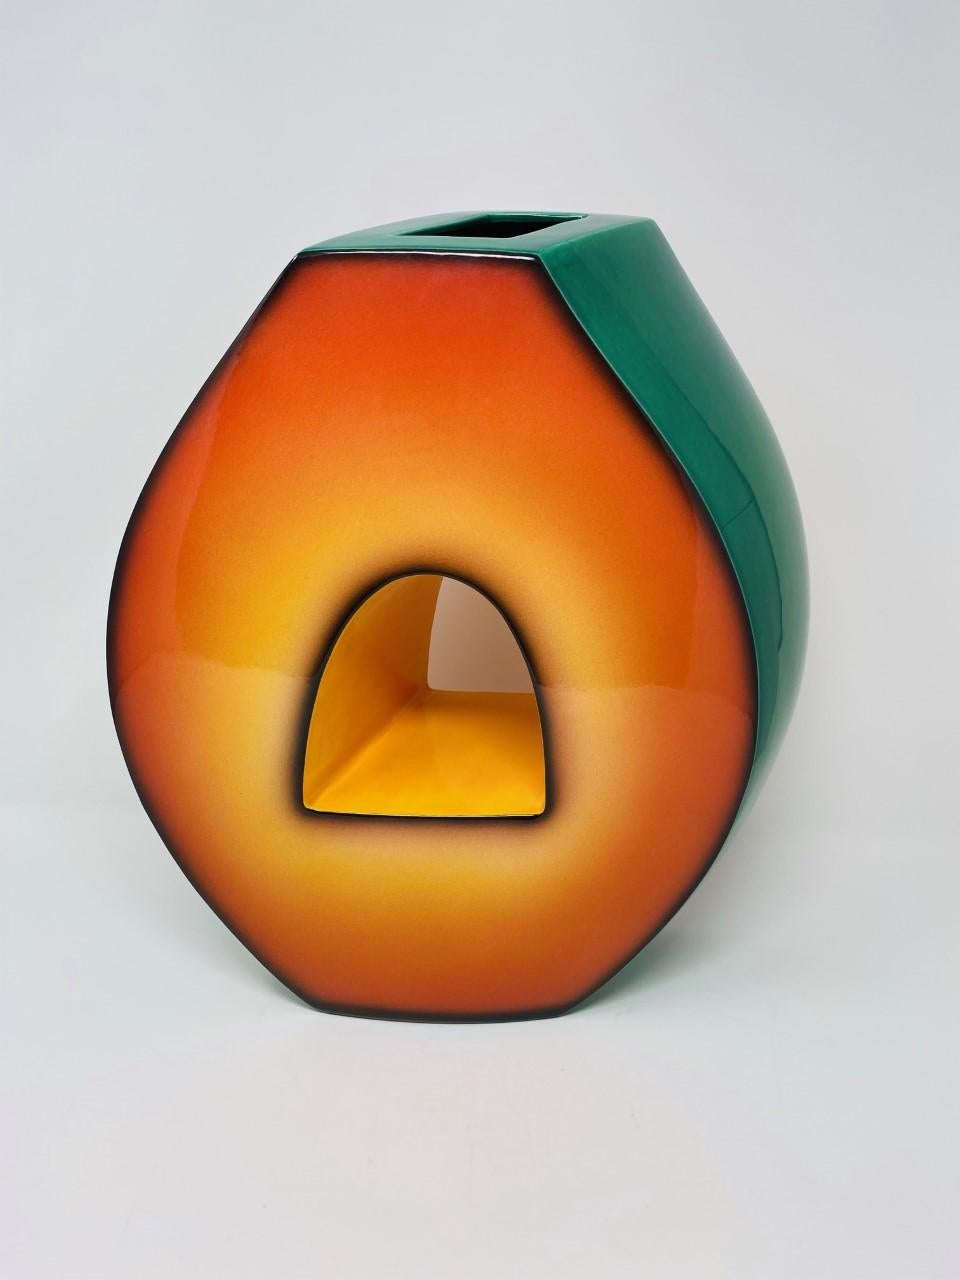 Classic piece in Fred Stodder’s style. Stodder’s unique pieces are reminiscent of the vibrant Memphis Group (an Italian design group active during the ‘80s) aesthetic. His pieces are unlike traditional ceramic work-he glides into modernity with